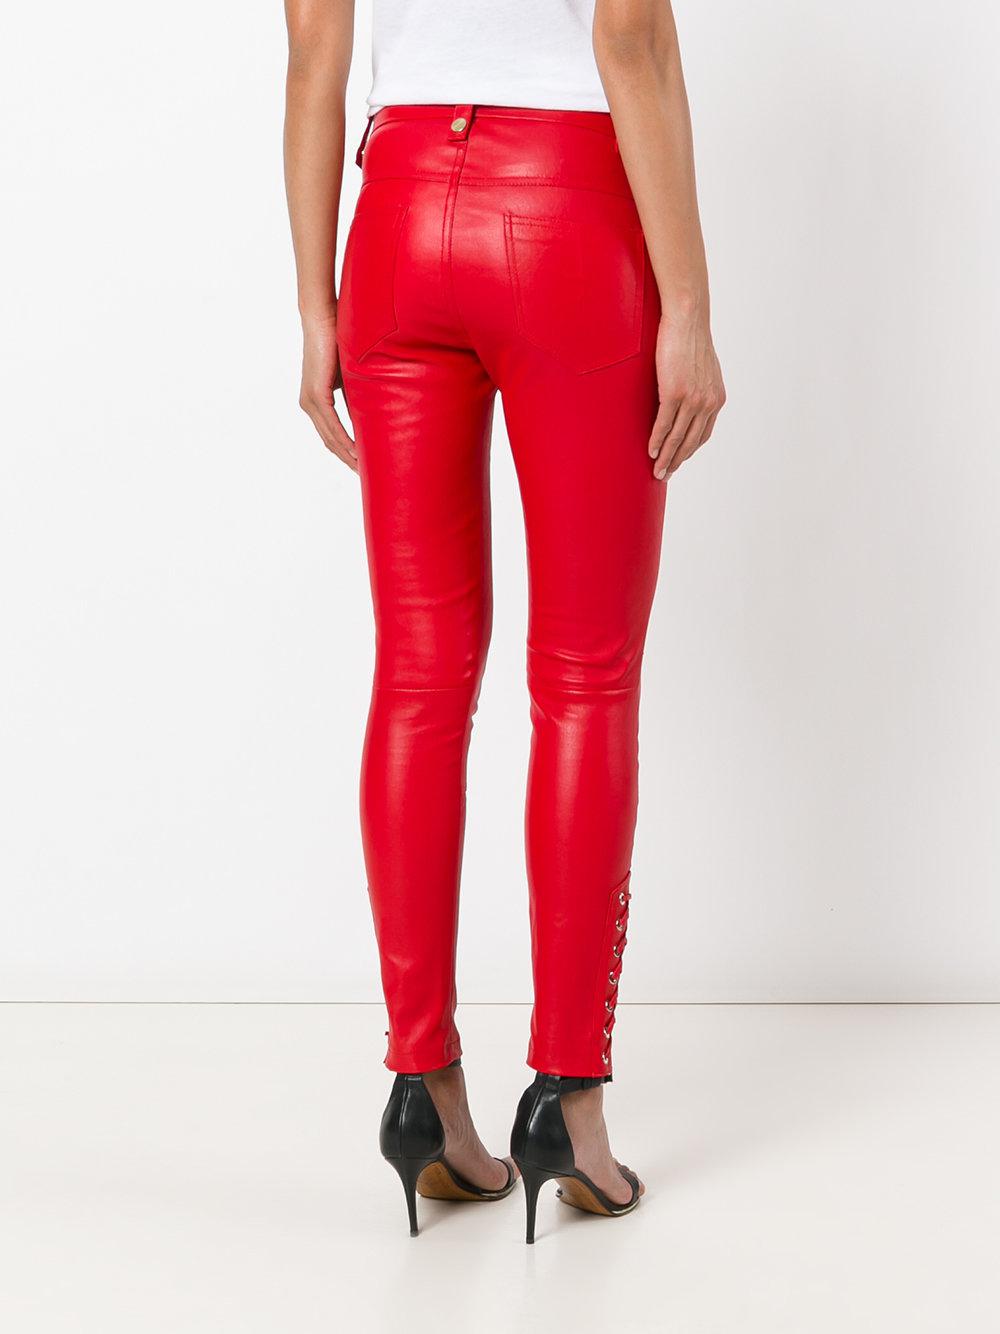 Manokhi Lace Up High Shine Pants in Red - Lyst